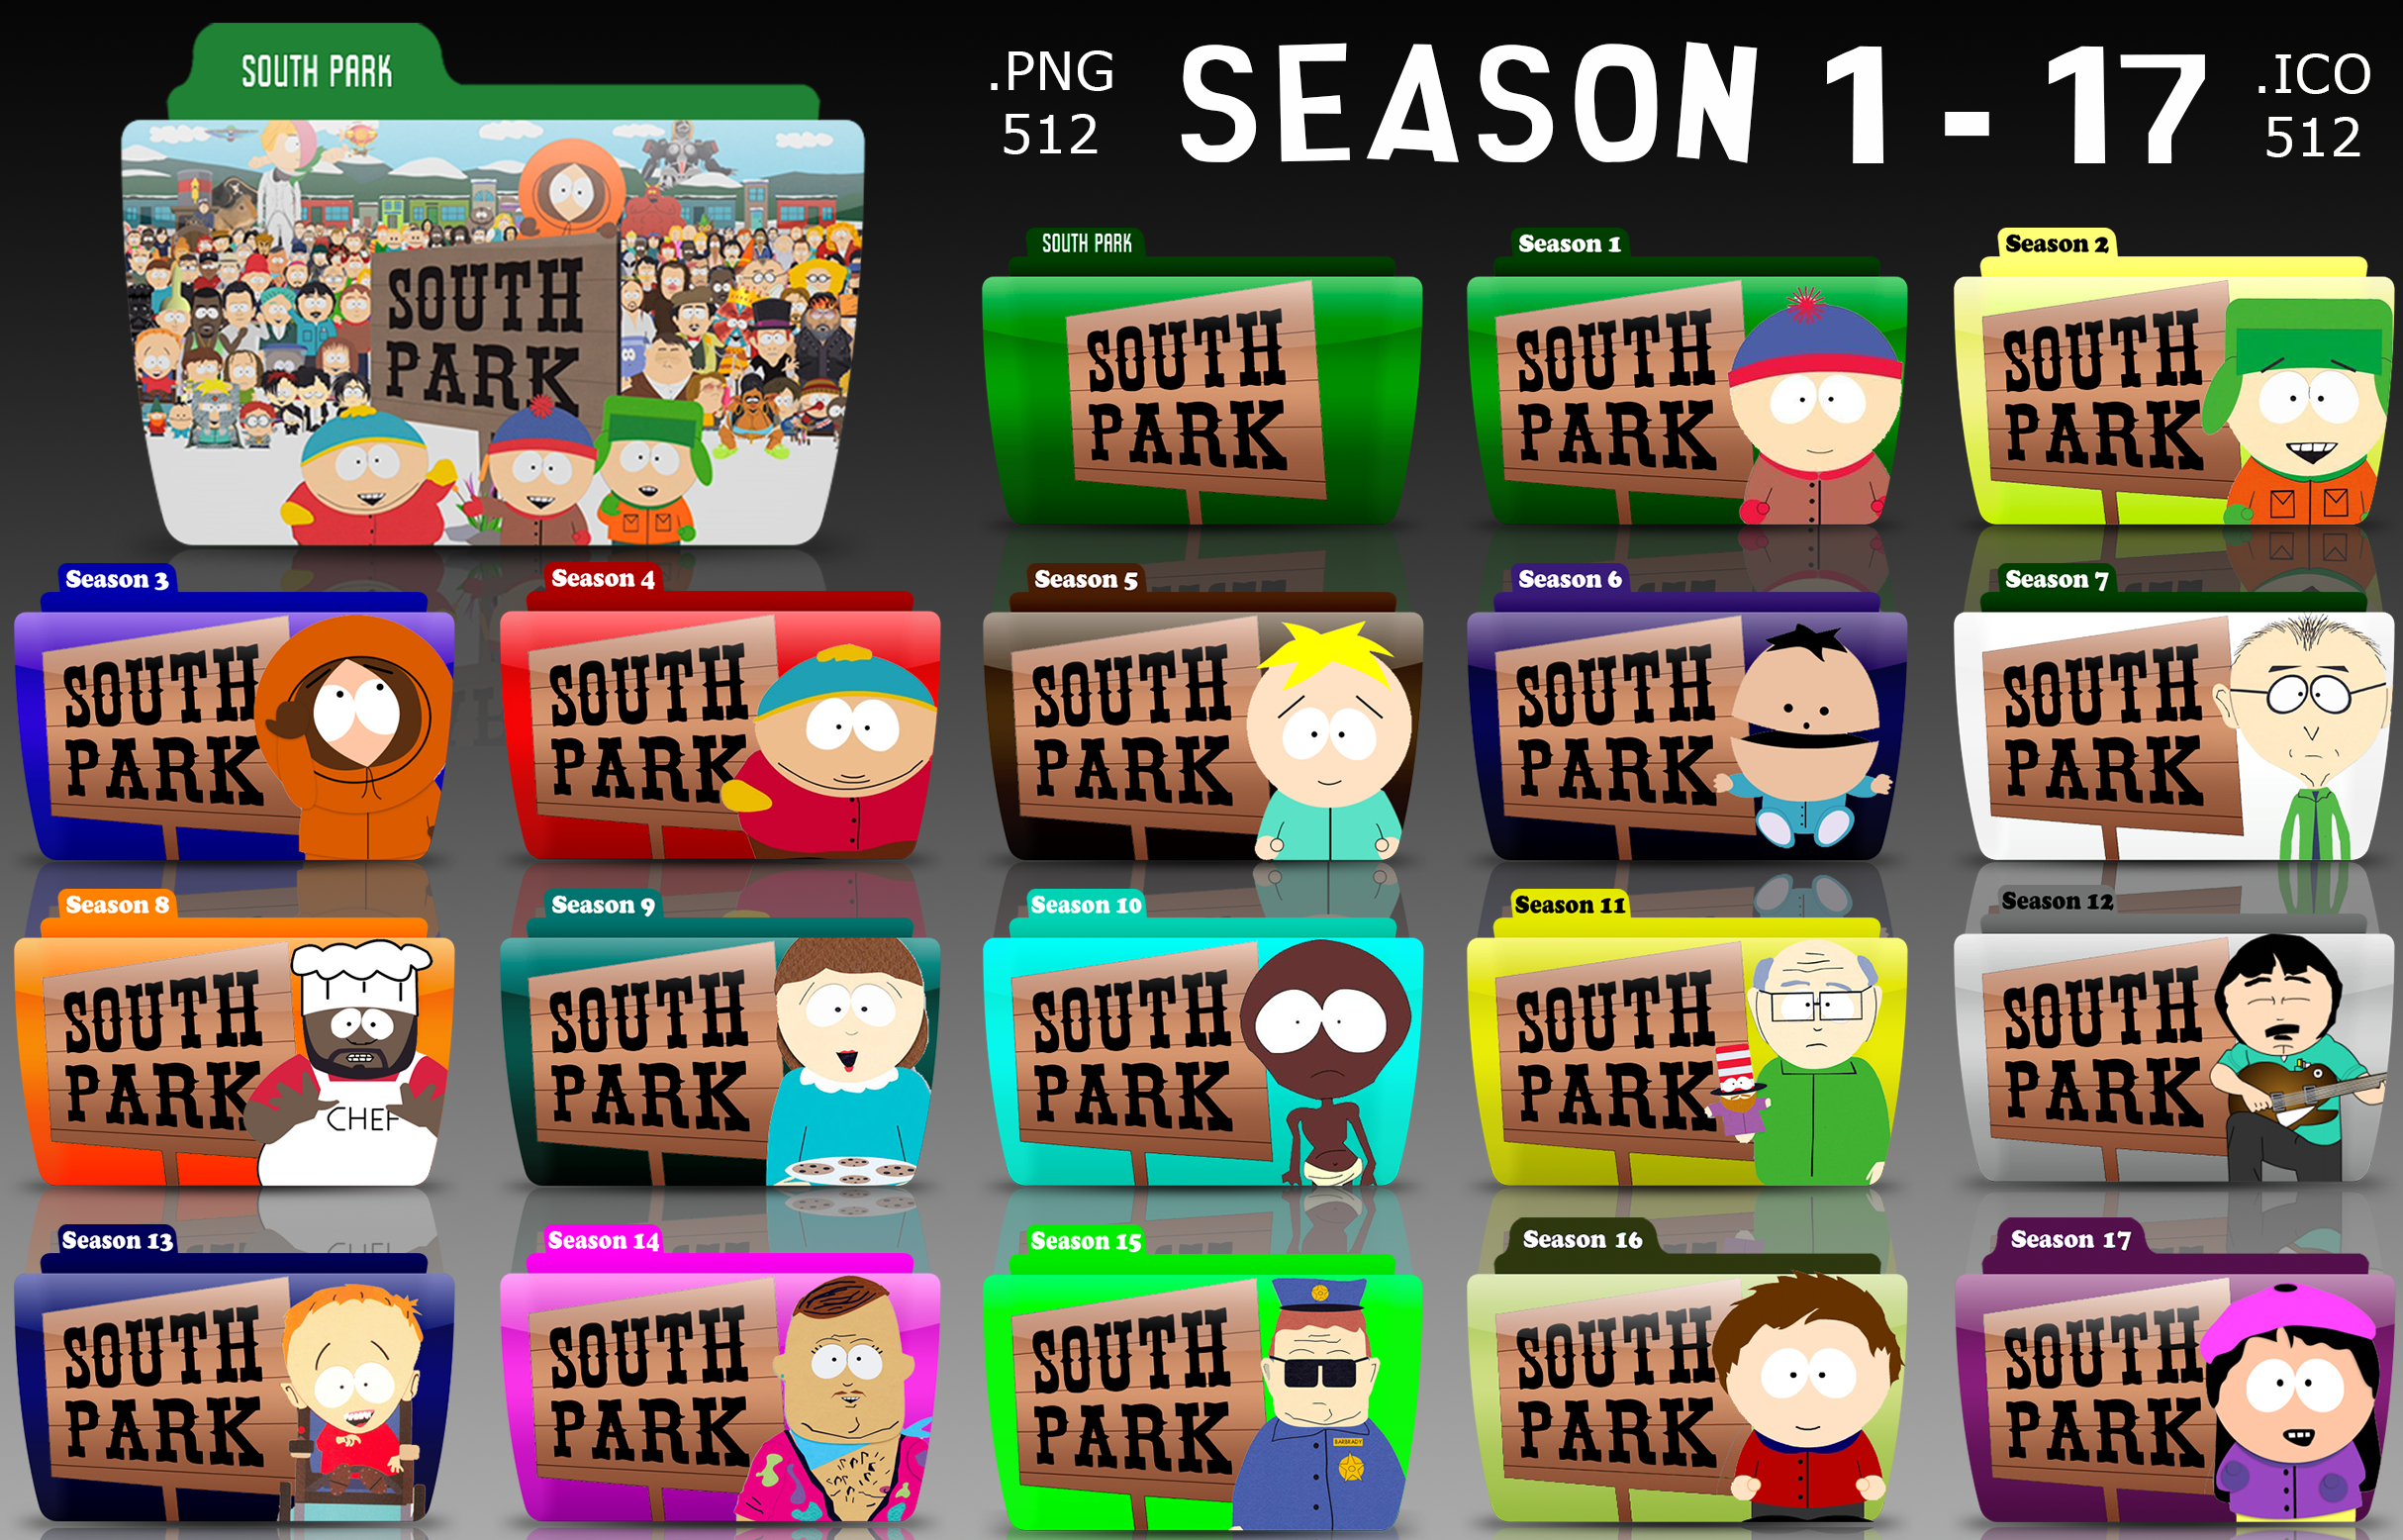 South Park Staffel 5 Complete German Xvid